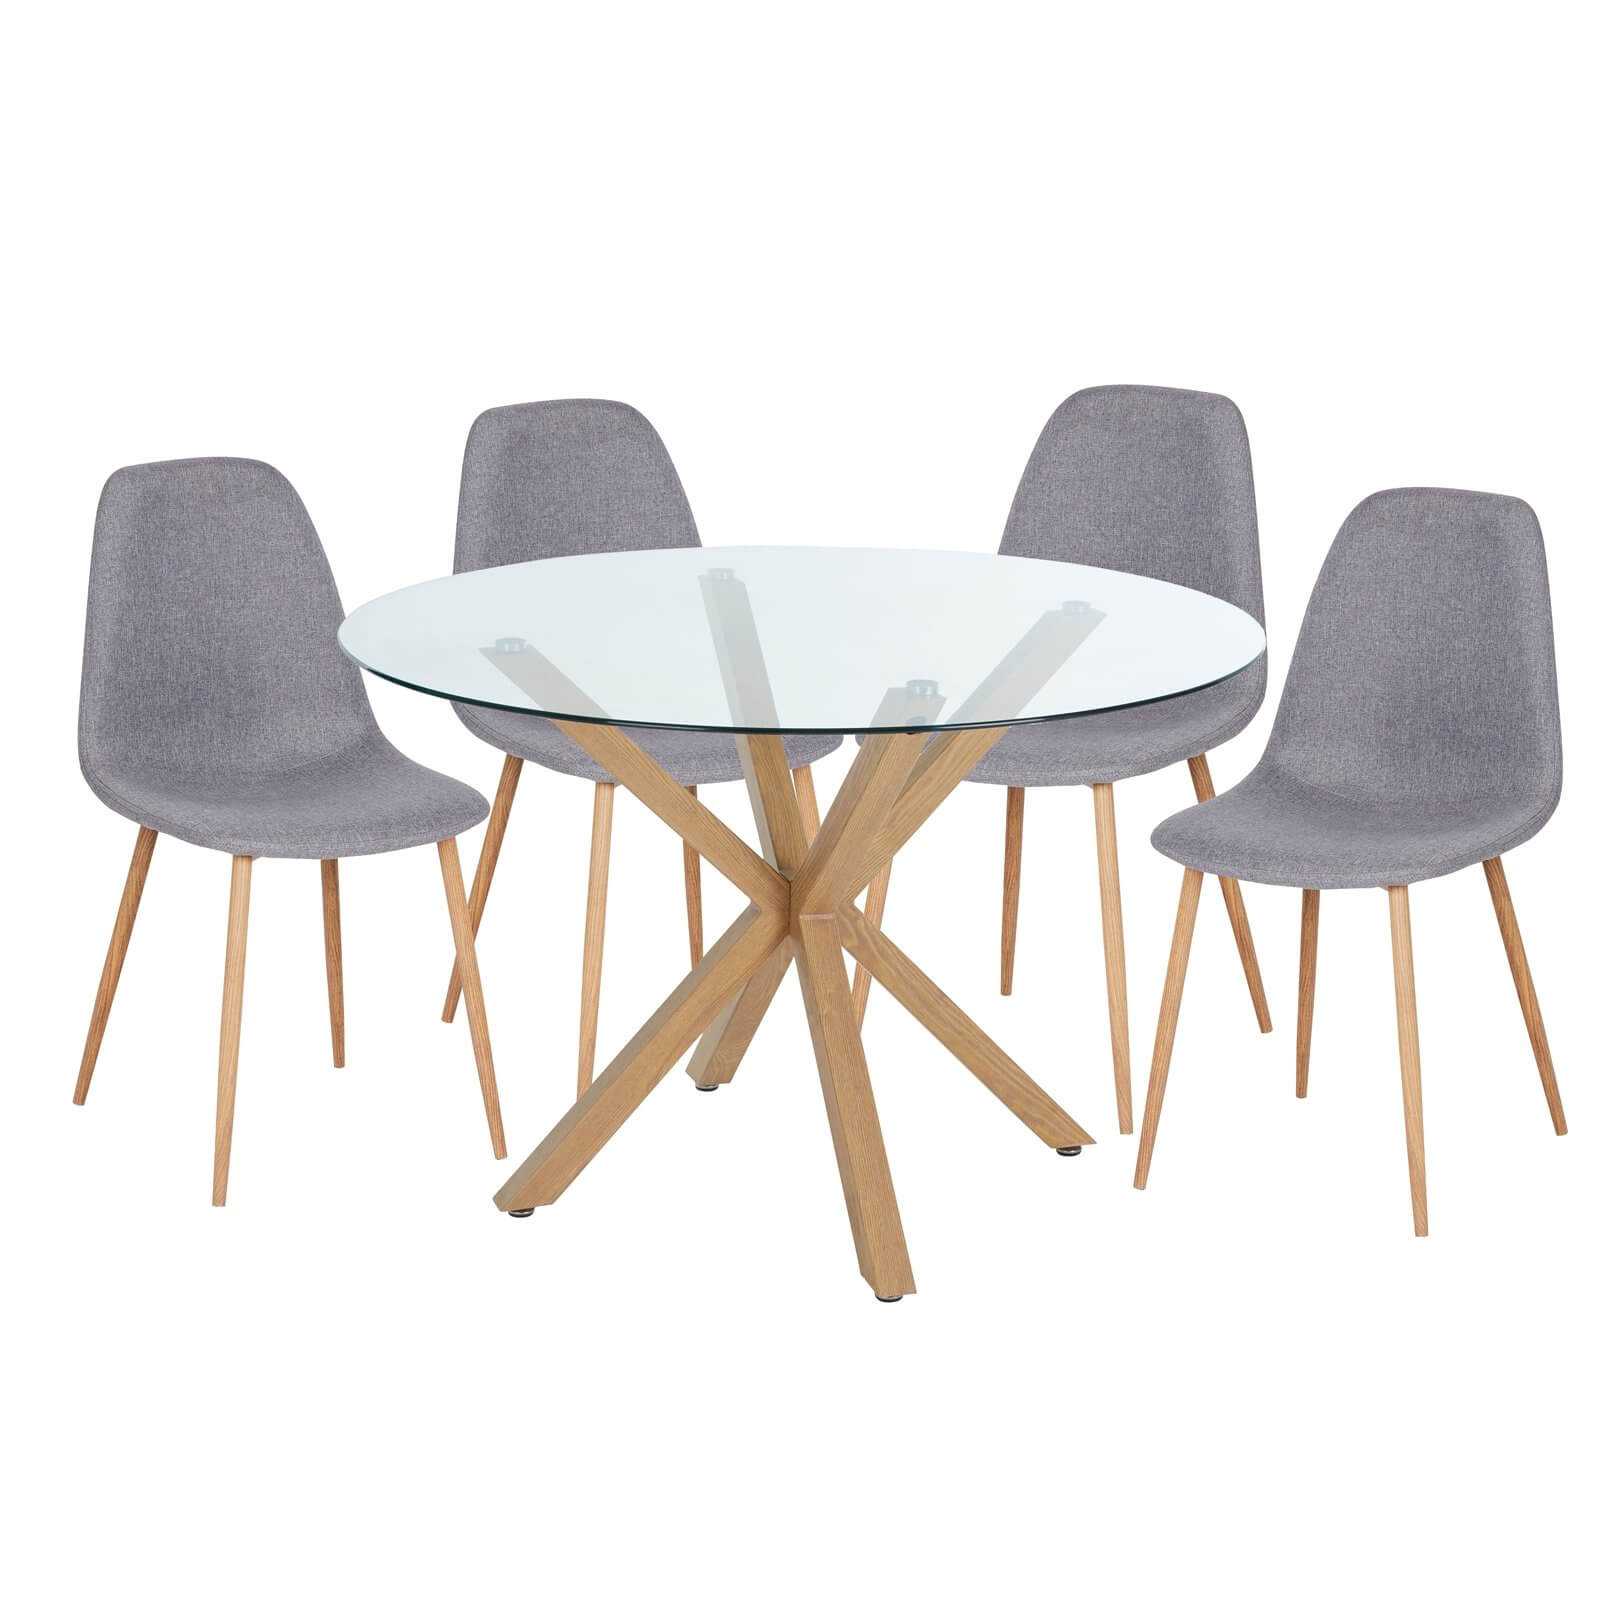 Ludlow Round Dining Table and 4 Chairs - Grey